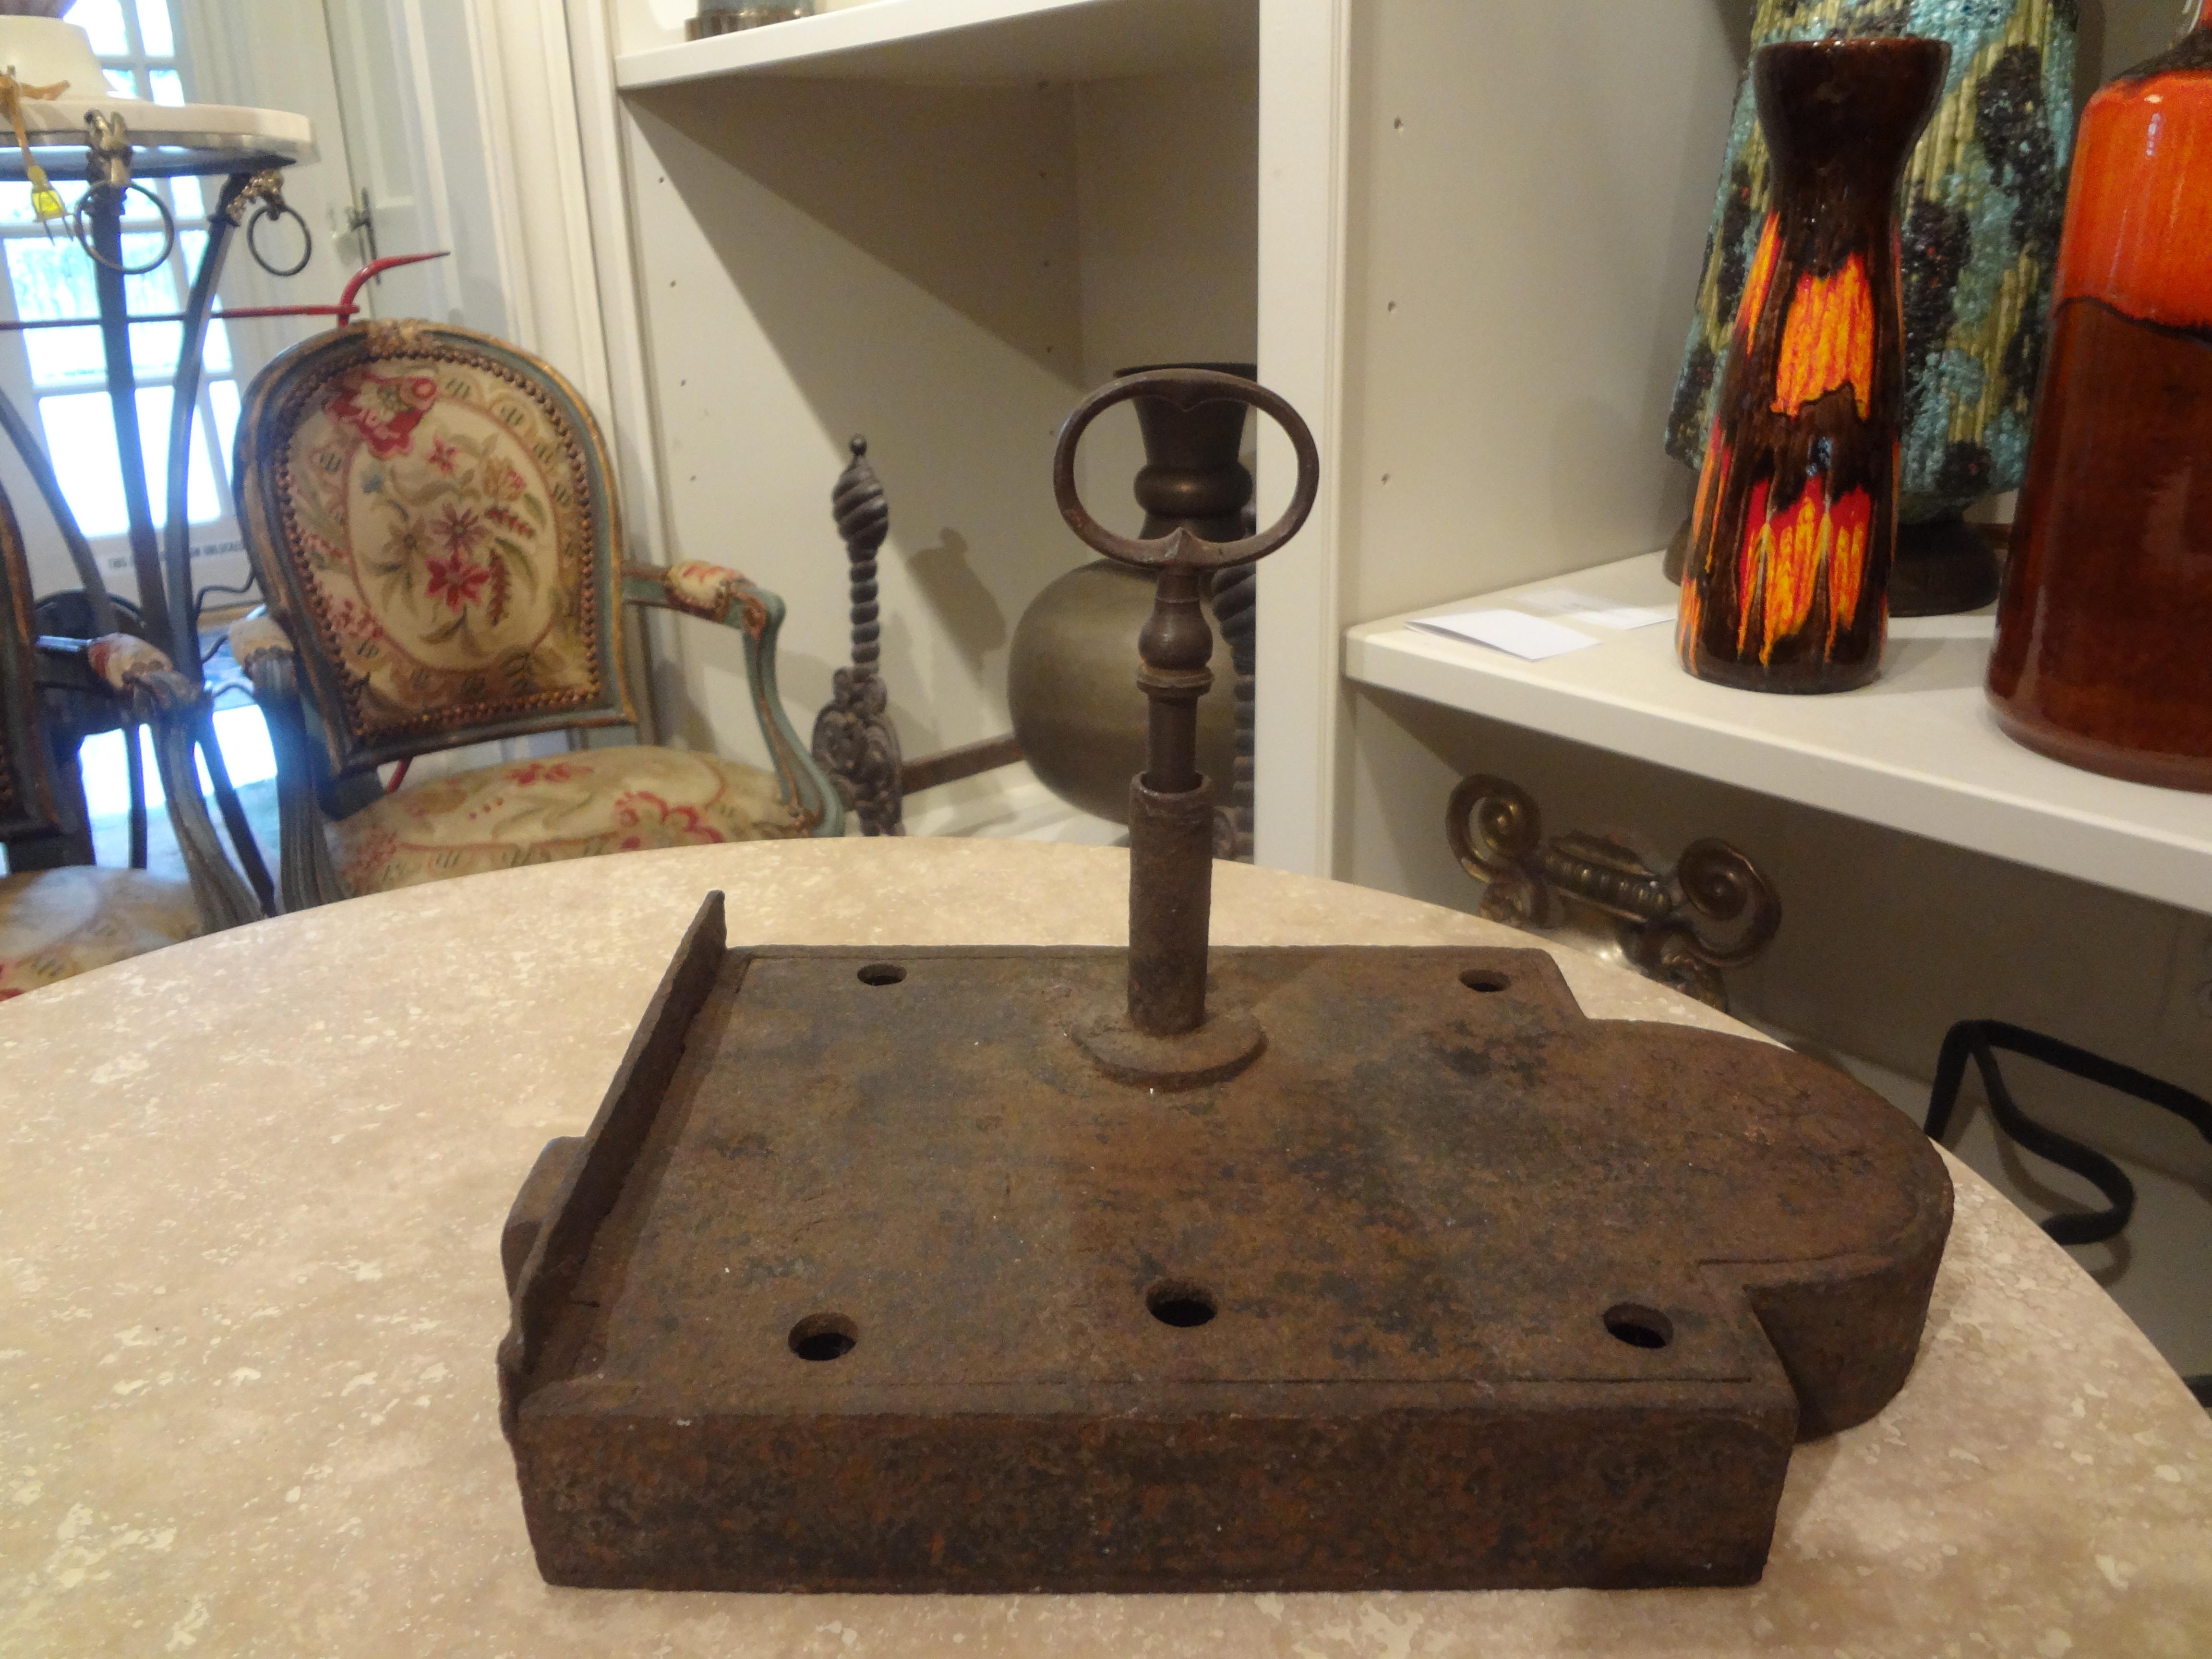 Large 18th century French iron lock and key. This handsome french iron lock comes with the original key and makes an interesting coffee table accessory or paperweight.